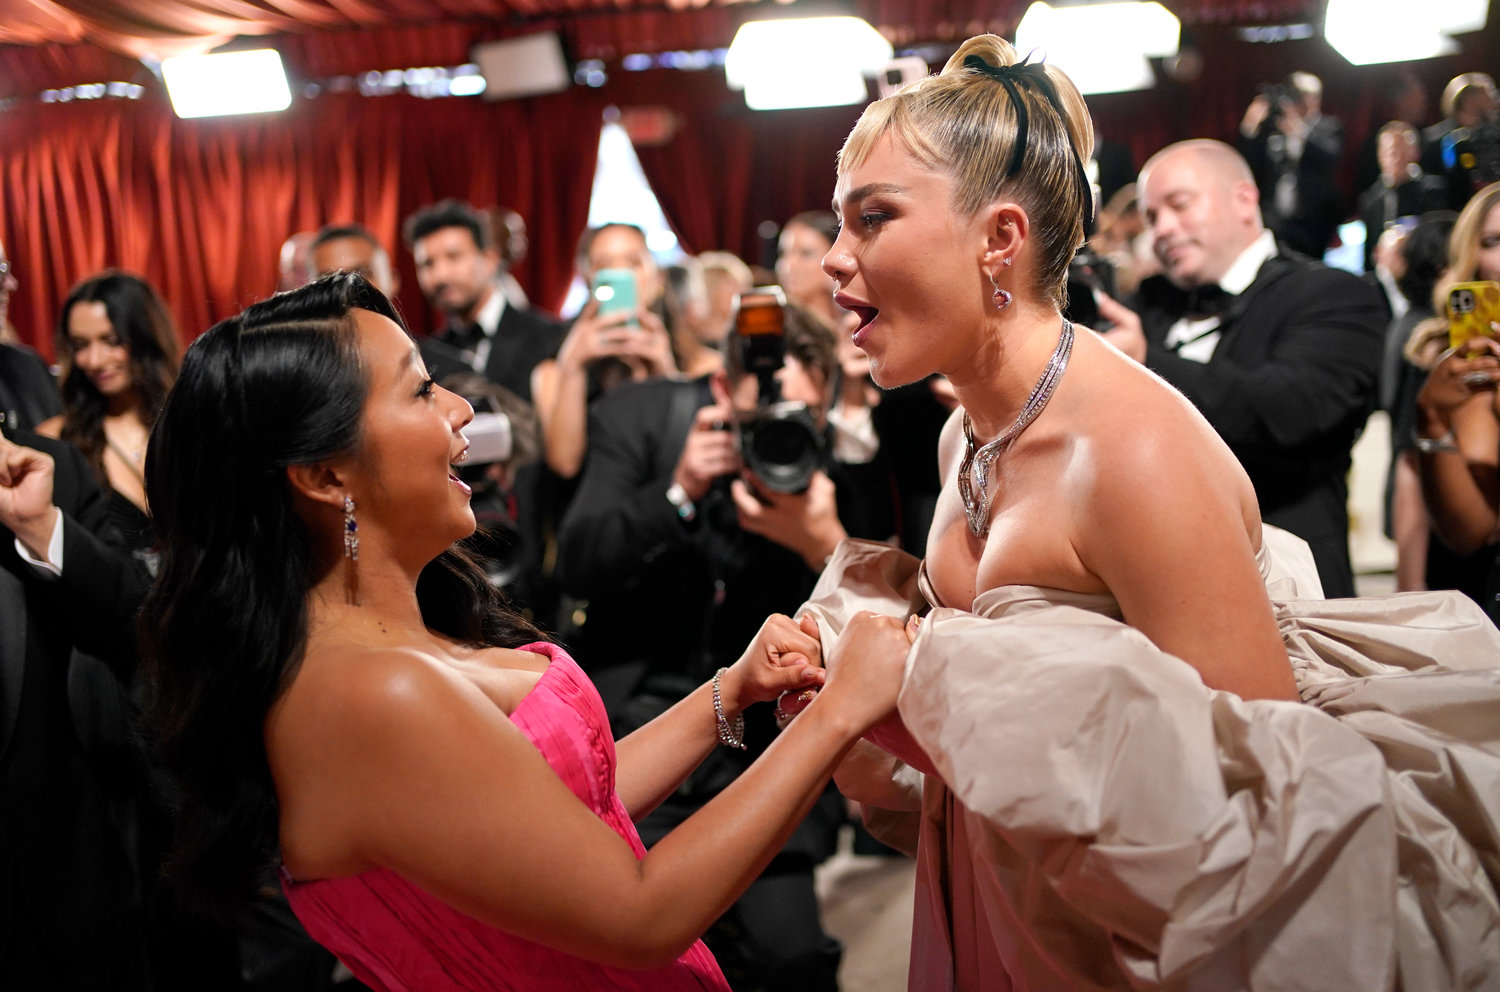 Stephanie Hsu, left, and Florence Pugh arrive at the Oscars on Sunday, March 12, 2023, at the Dolby Theatre in Los Angeles. (AP Photo/John Locher)